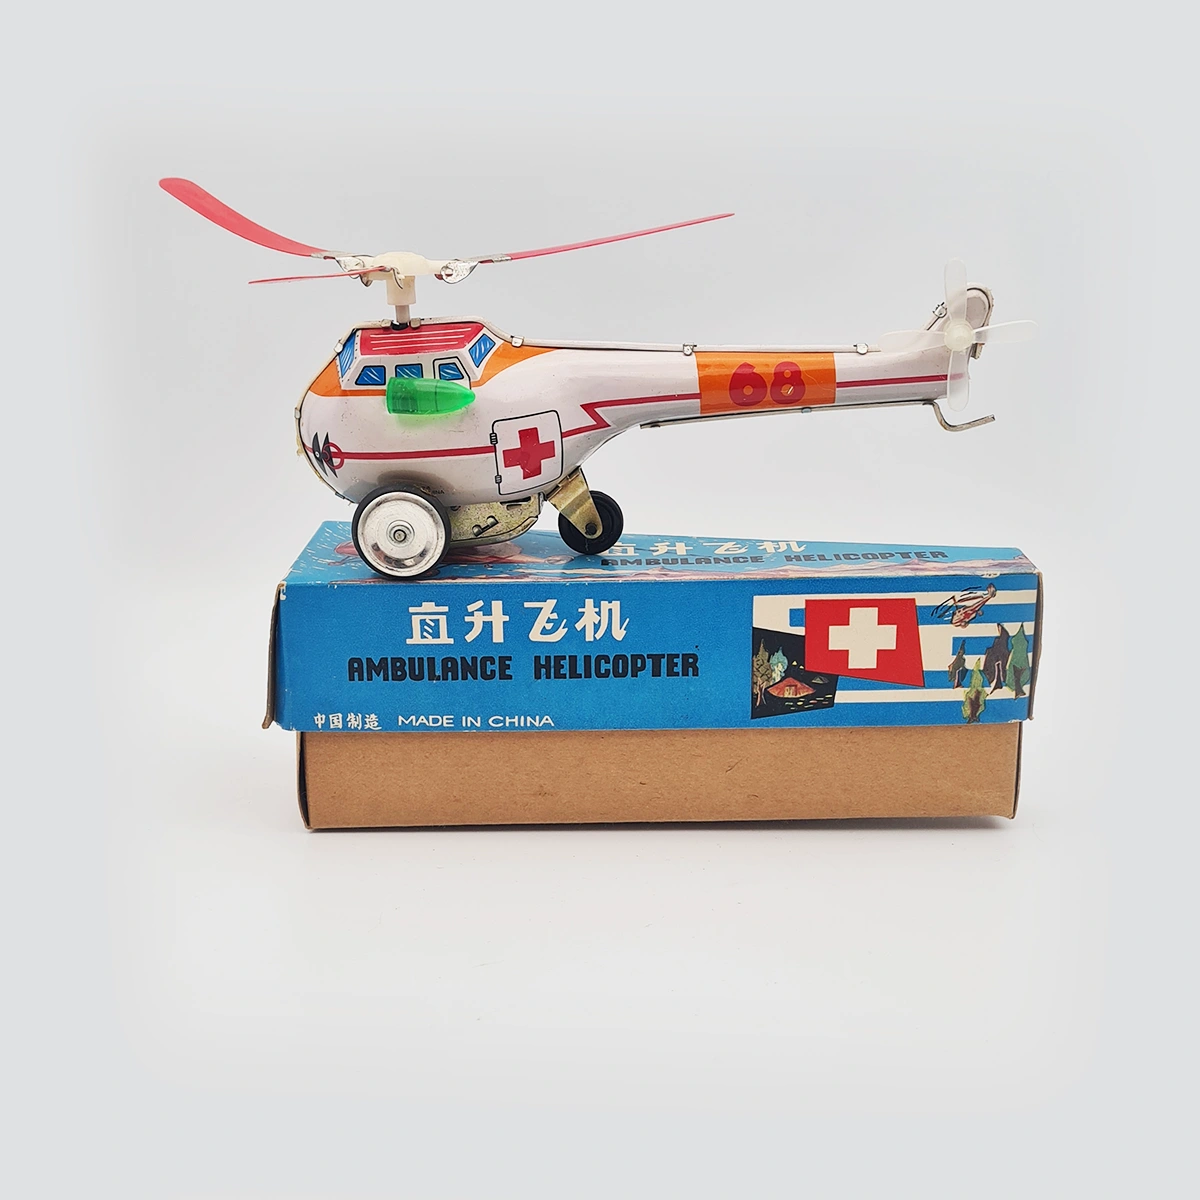 Ambulance Helicopter Tin Friction Toy- Made in China